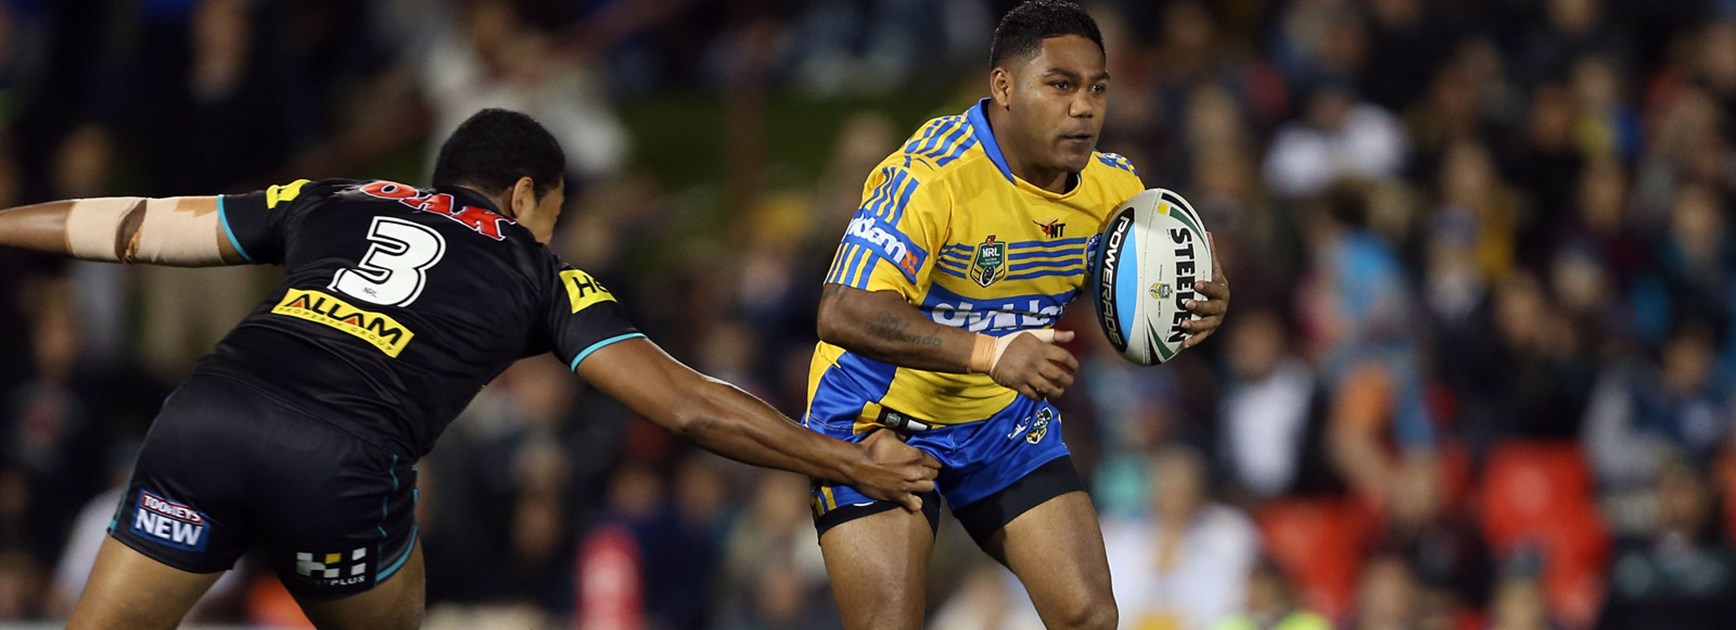 Eels halfback Chris Sandow was lively against the Panthers in Round 12.